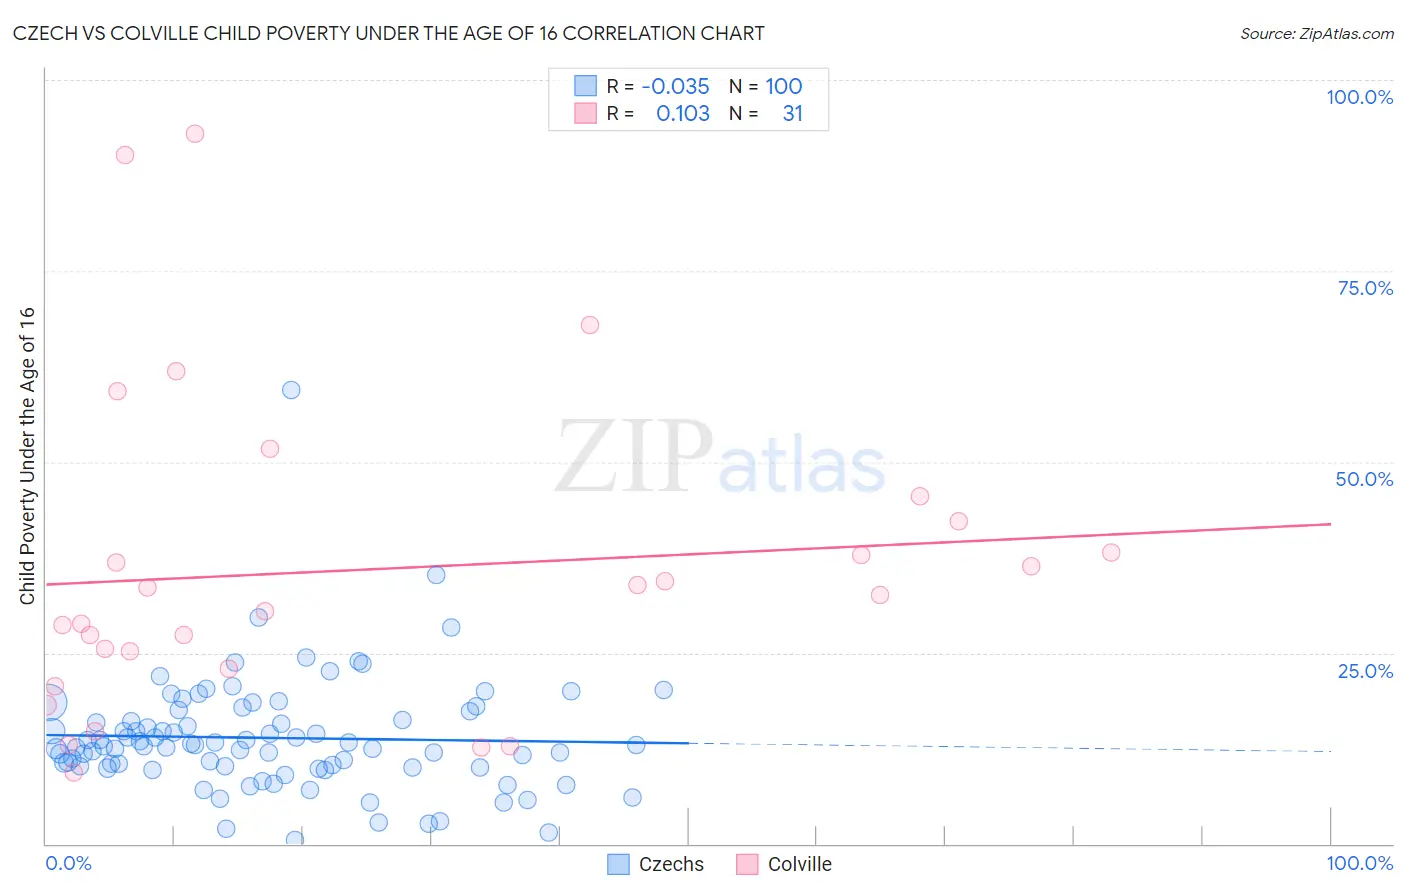 Czech vs Colville Child Poverty Under the Age of 16